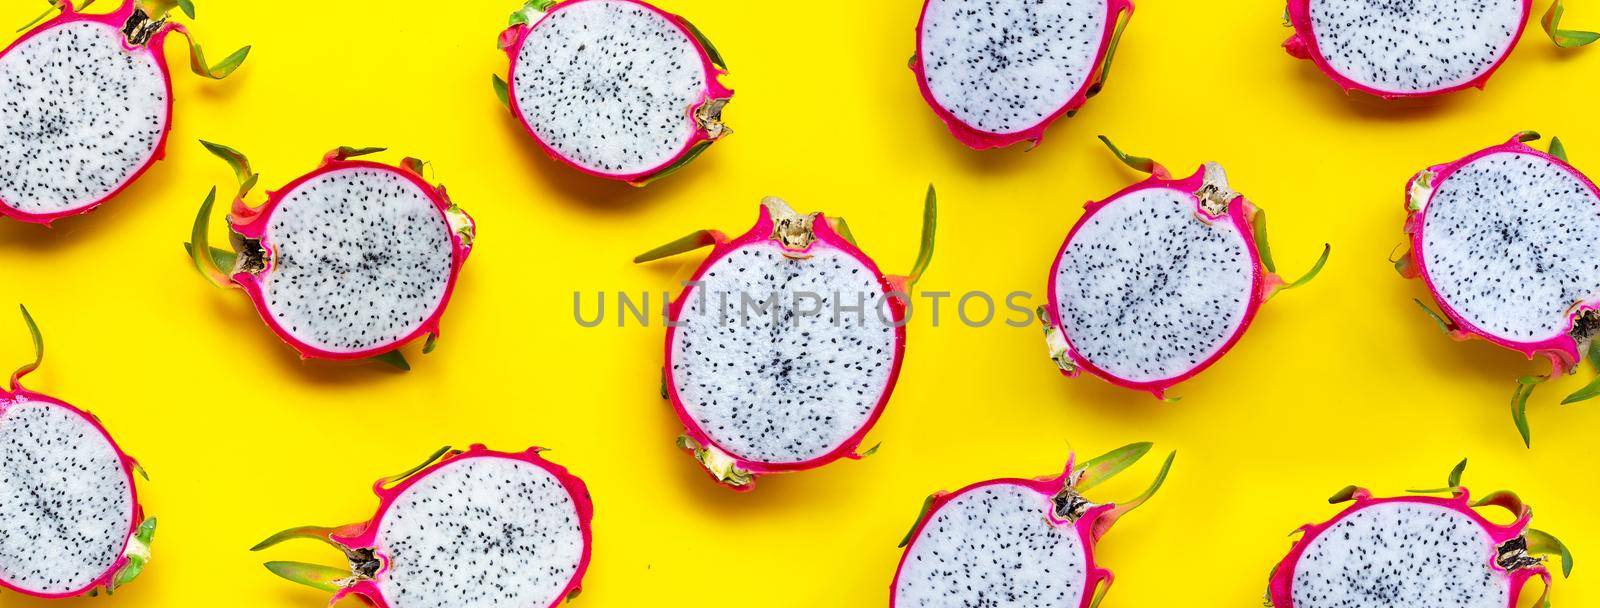 Dragon fruit or pitaya on yellow background. Delicious tropical exotic fruit. by Bowonpat